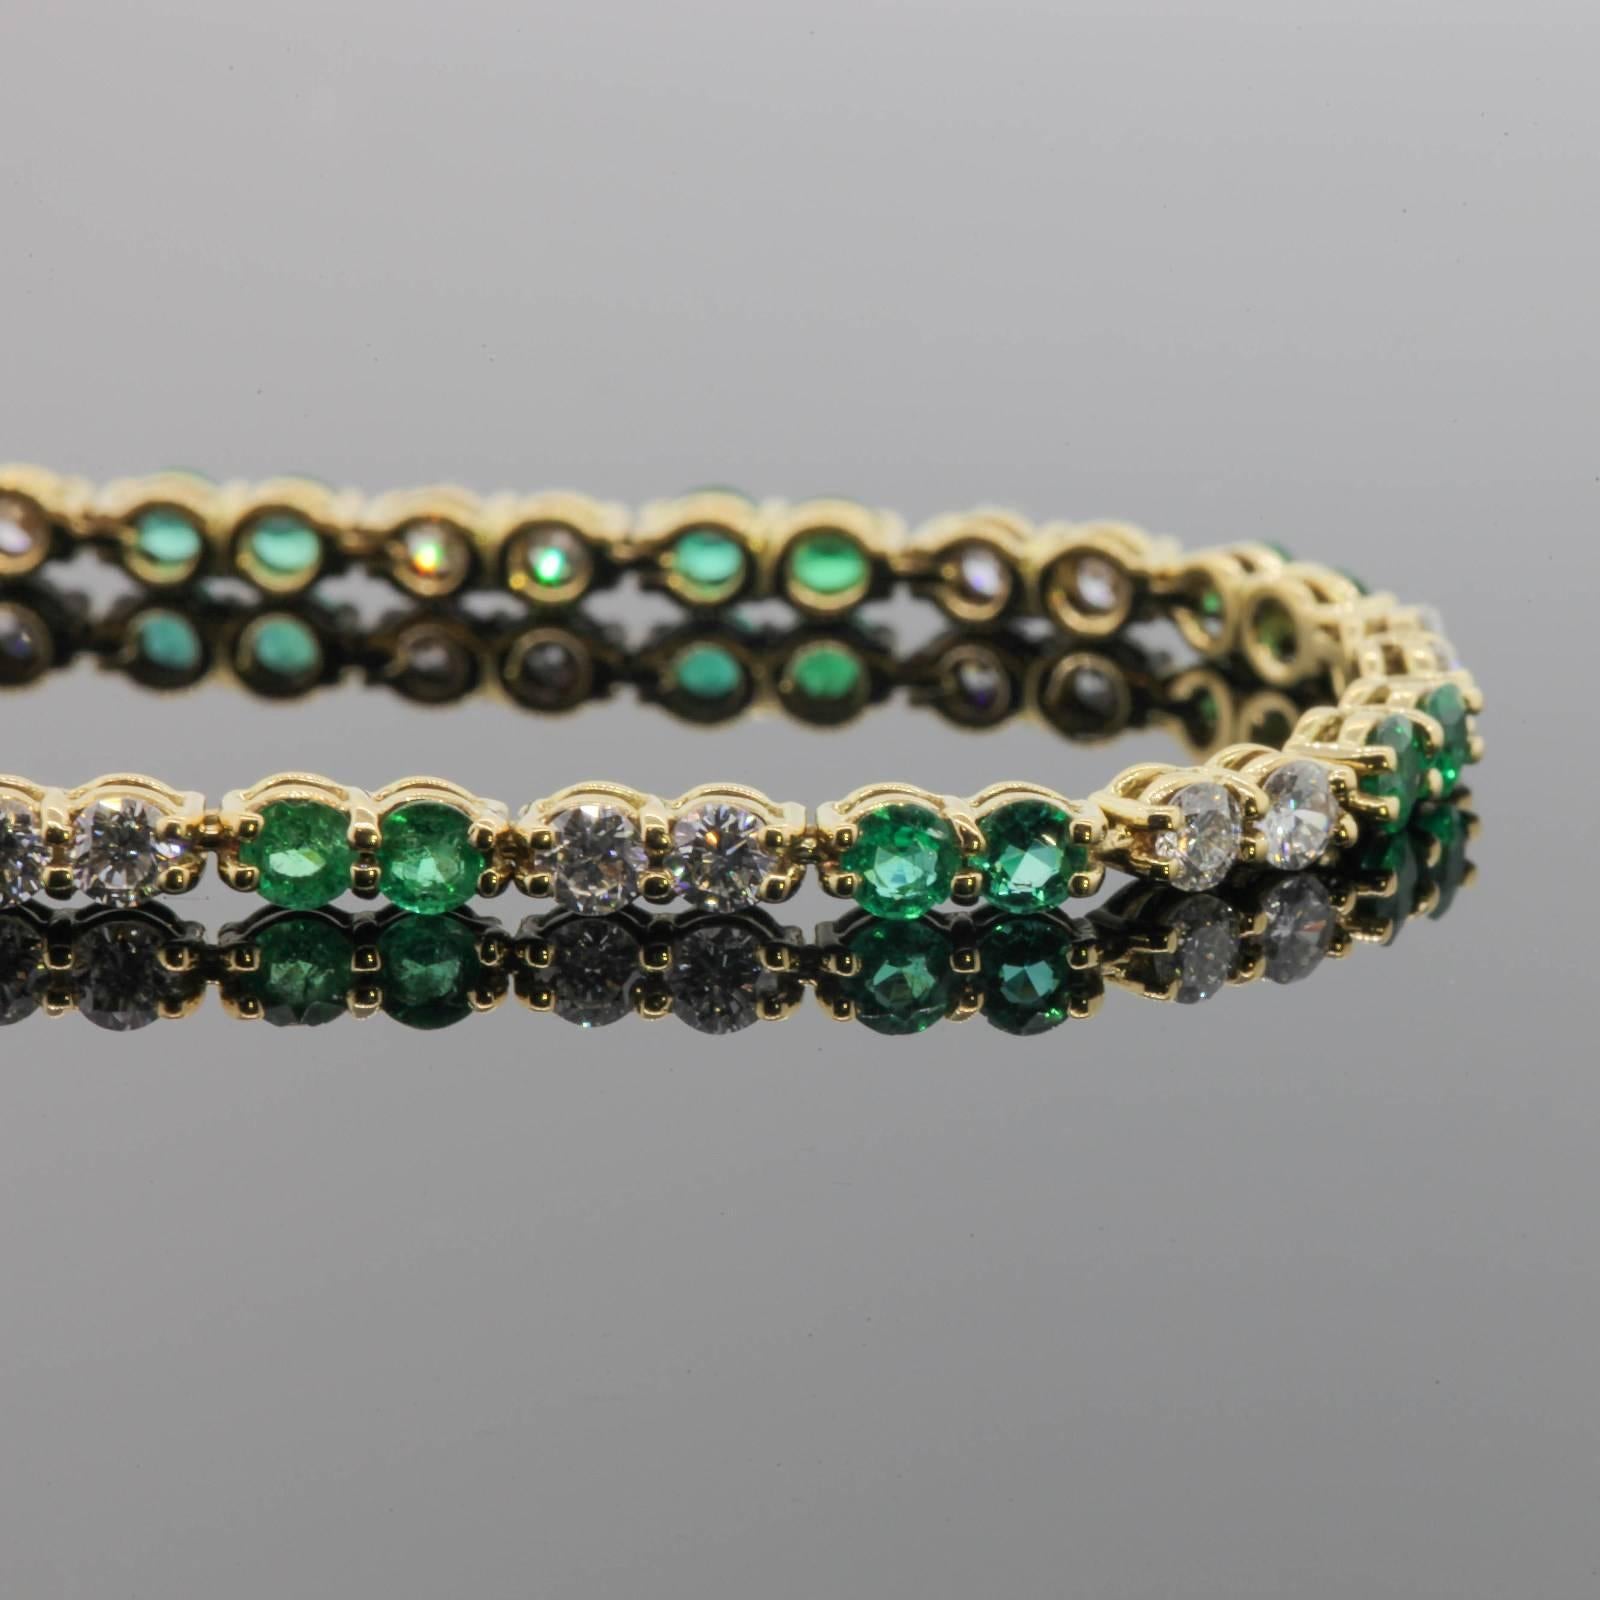 This bright happy 18KT yellow gold bracelet features 1.40 carats of Round cut Colombian Emeralds, and 1.70 carats of Round Brilliant Cut Diamonds.  All gems are set in double wire settings with common prongs.  The straight line bracelet measures 6